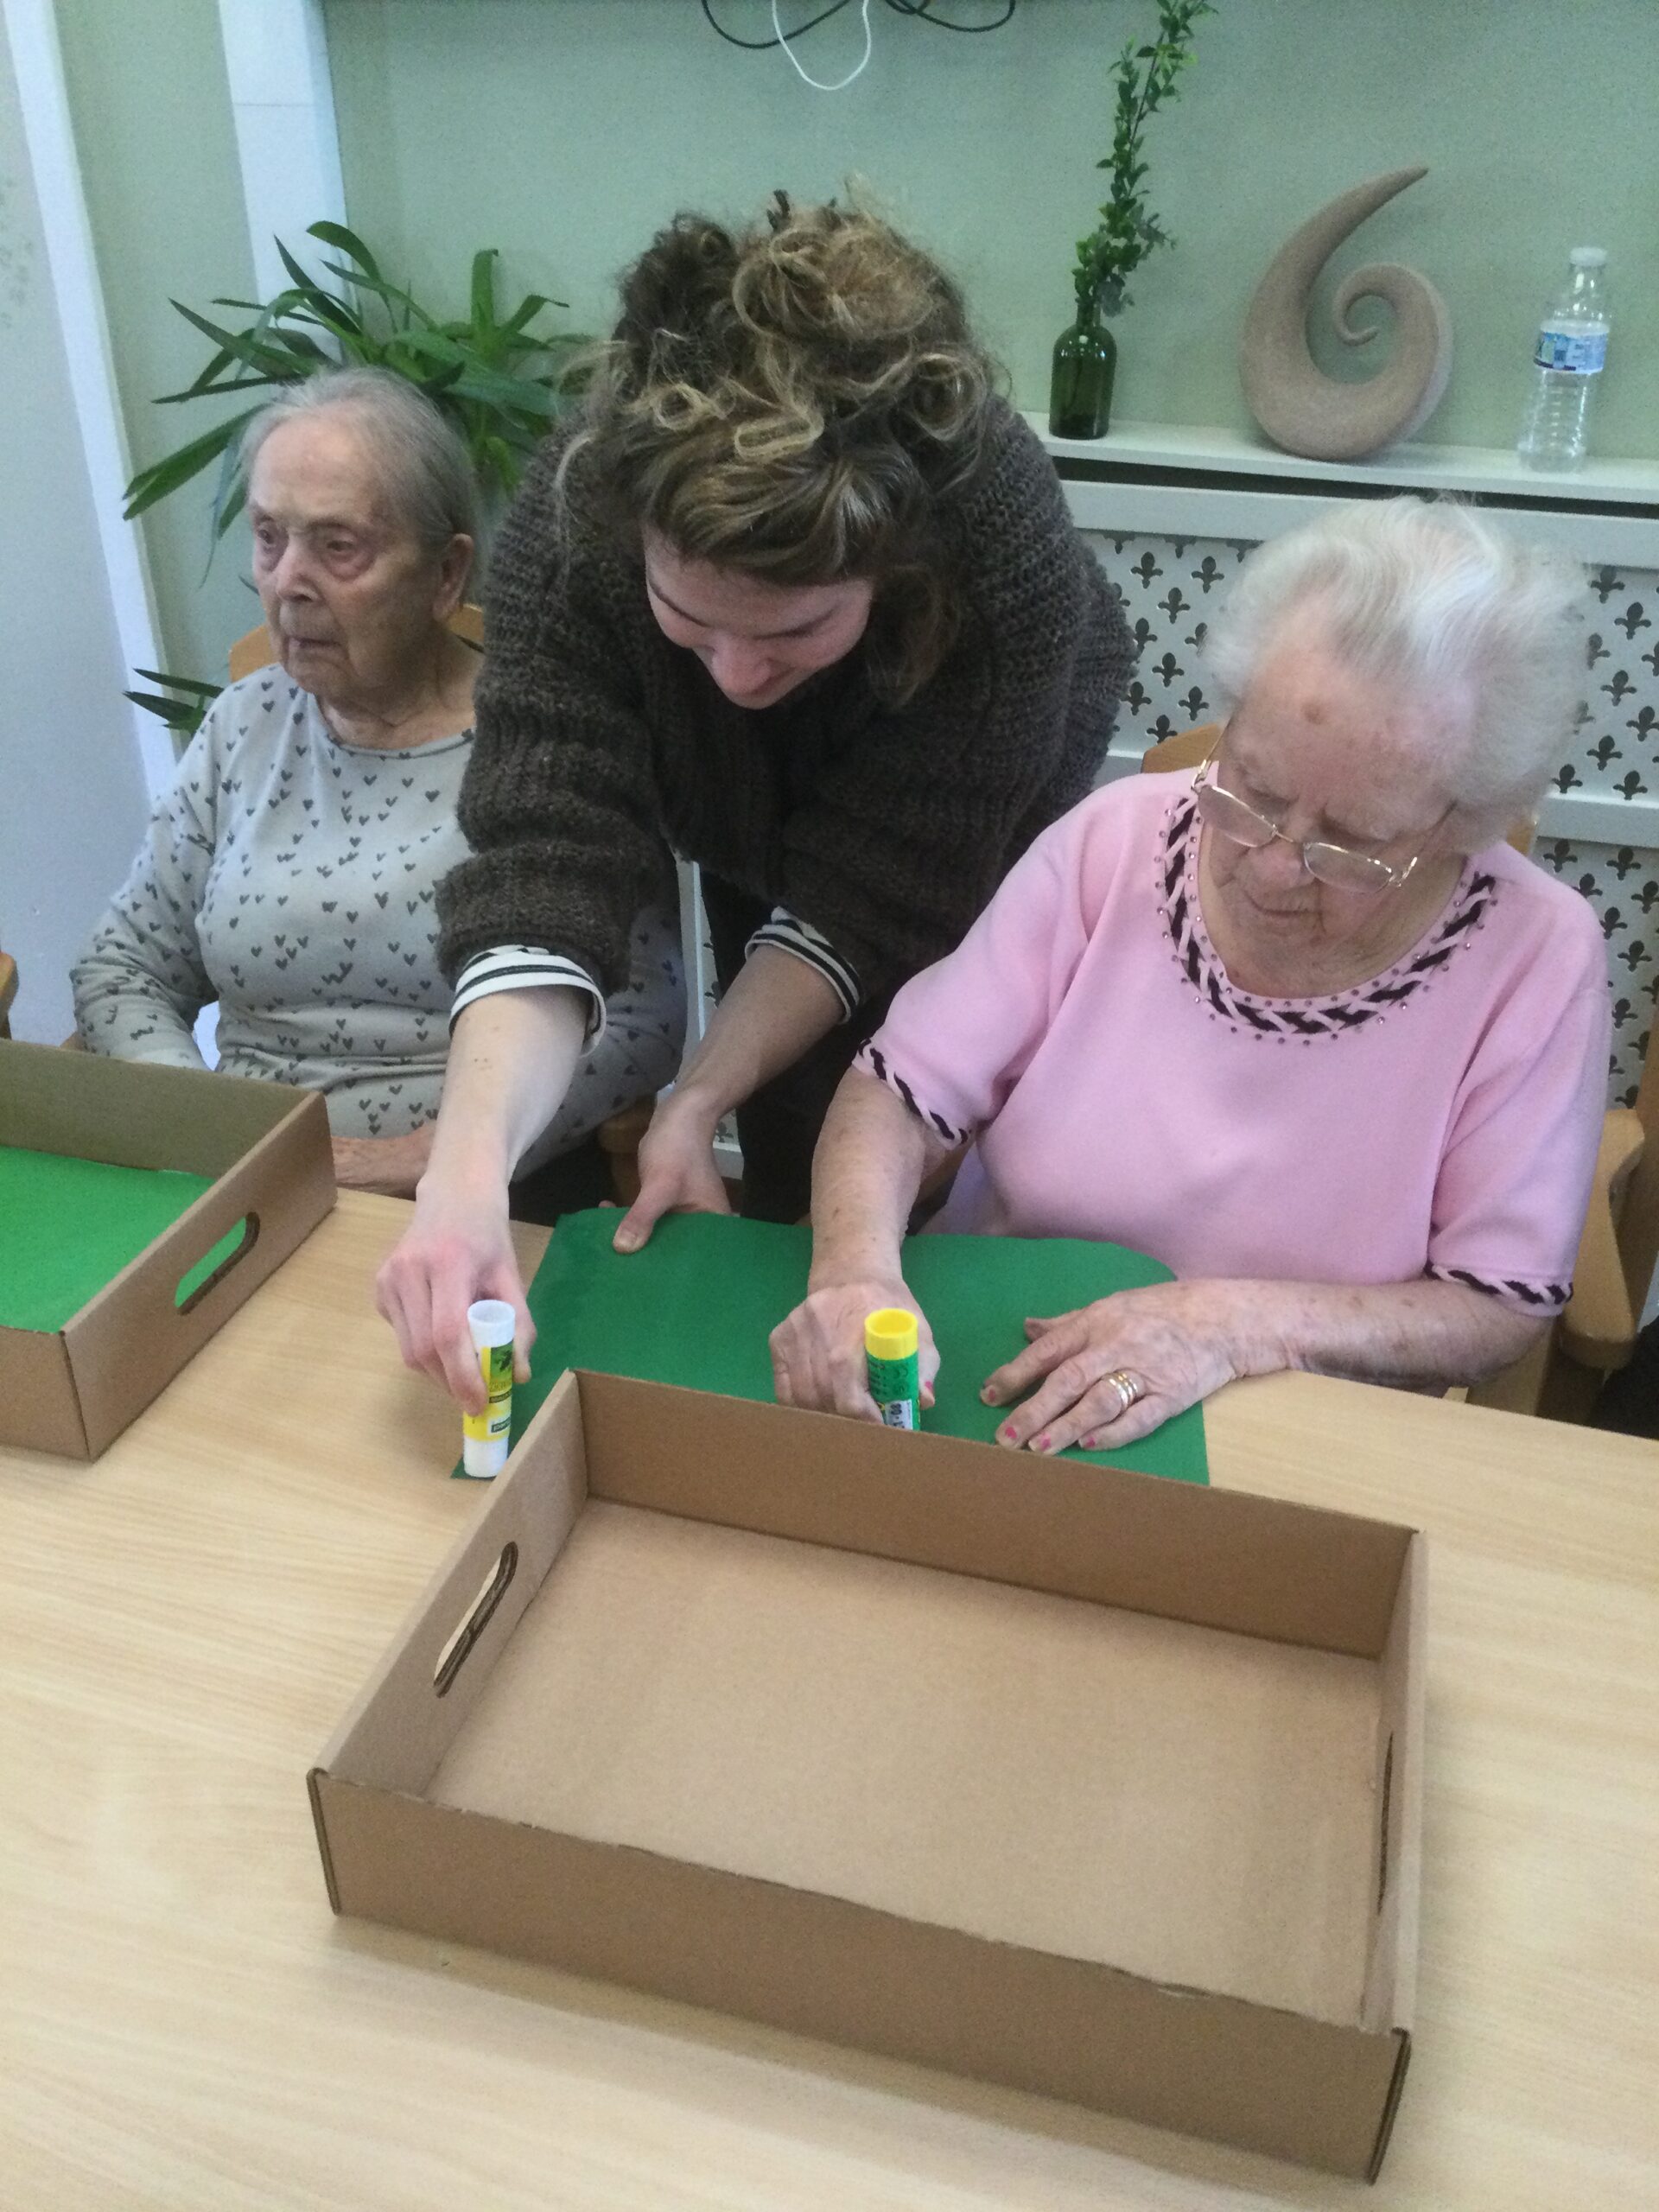 A woman leans between two ladies, applying glue to a piece of green material